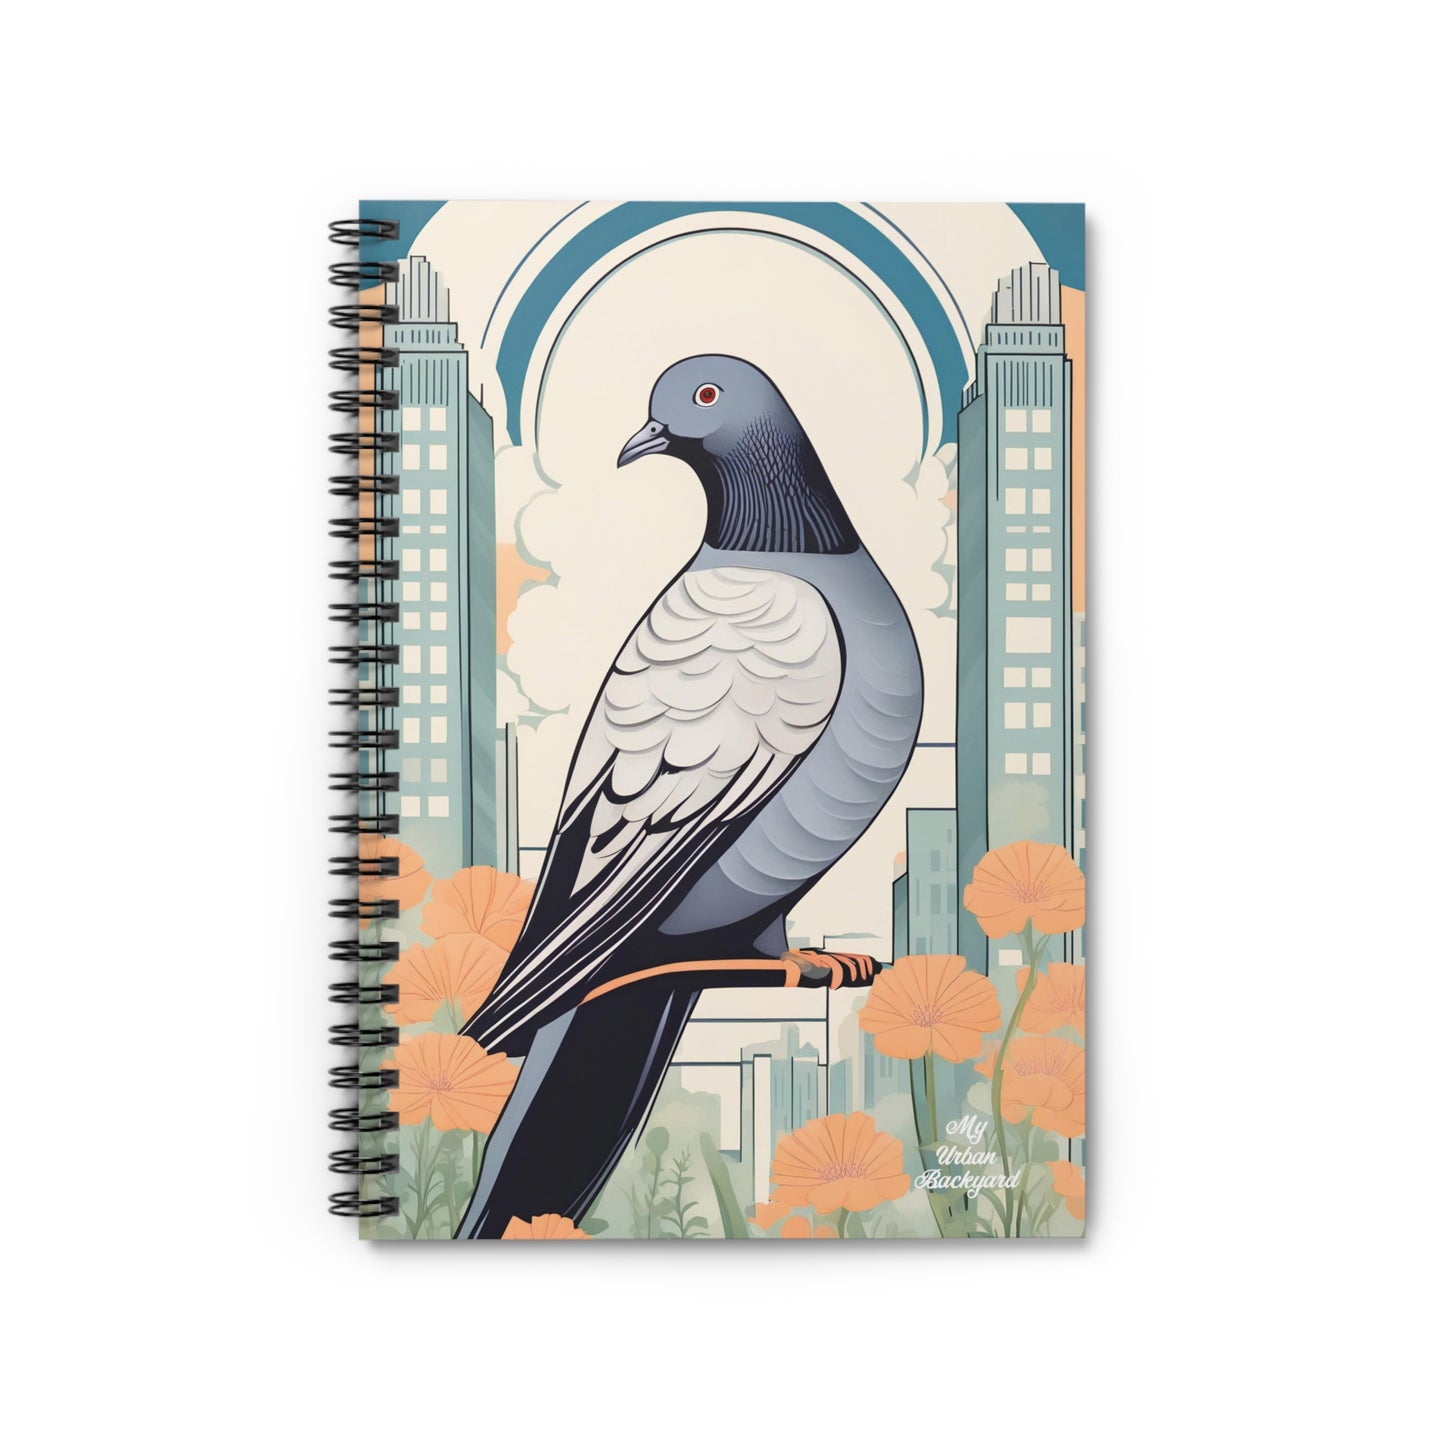 City Pigeon, Spiral Notebook Journal - Write in Style